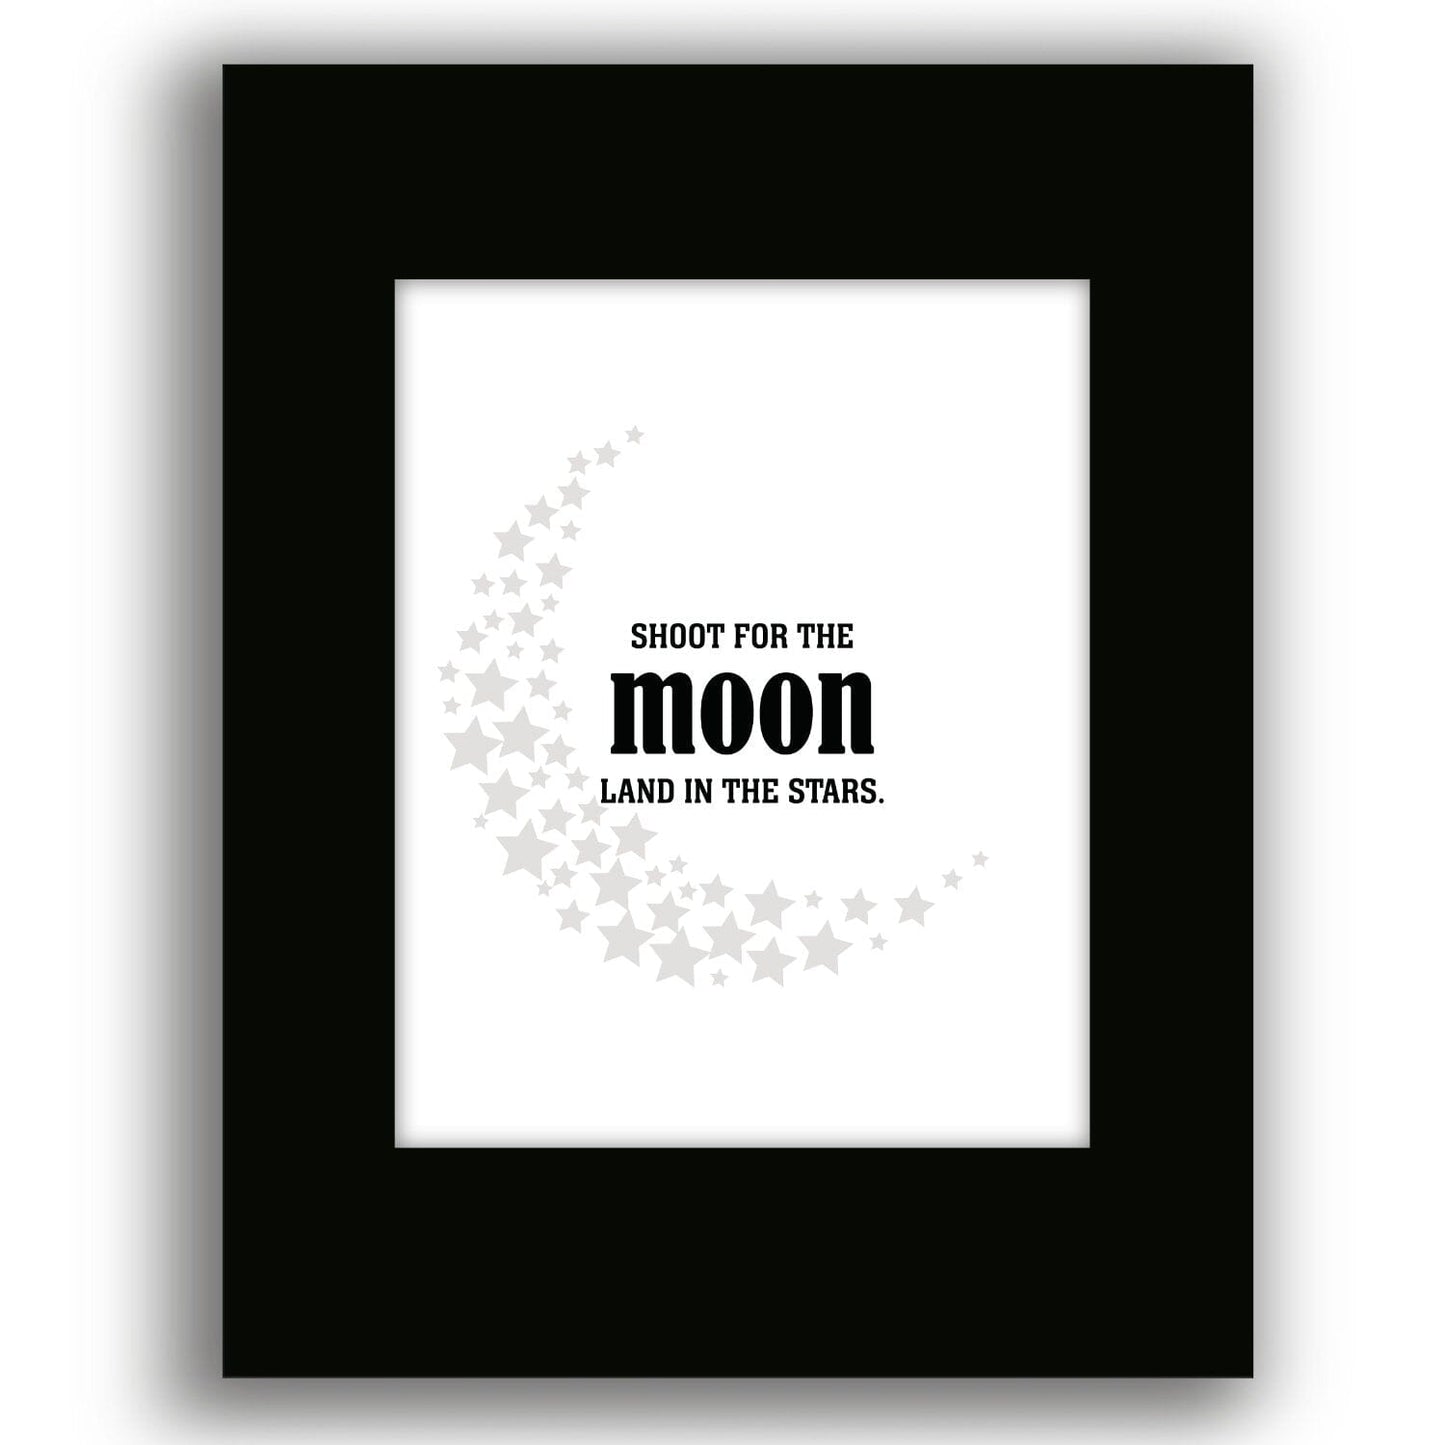 Shoot for the Moon, Land in the Stars - Wise and Witty Print Wise and Wiseass Quotes Song Lyrics Art 8x10 Black Matted Print 